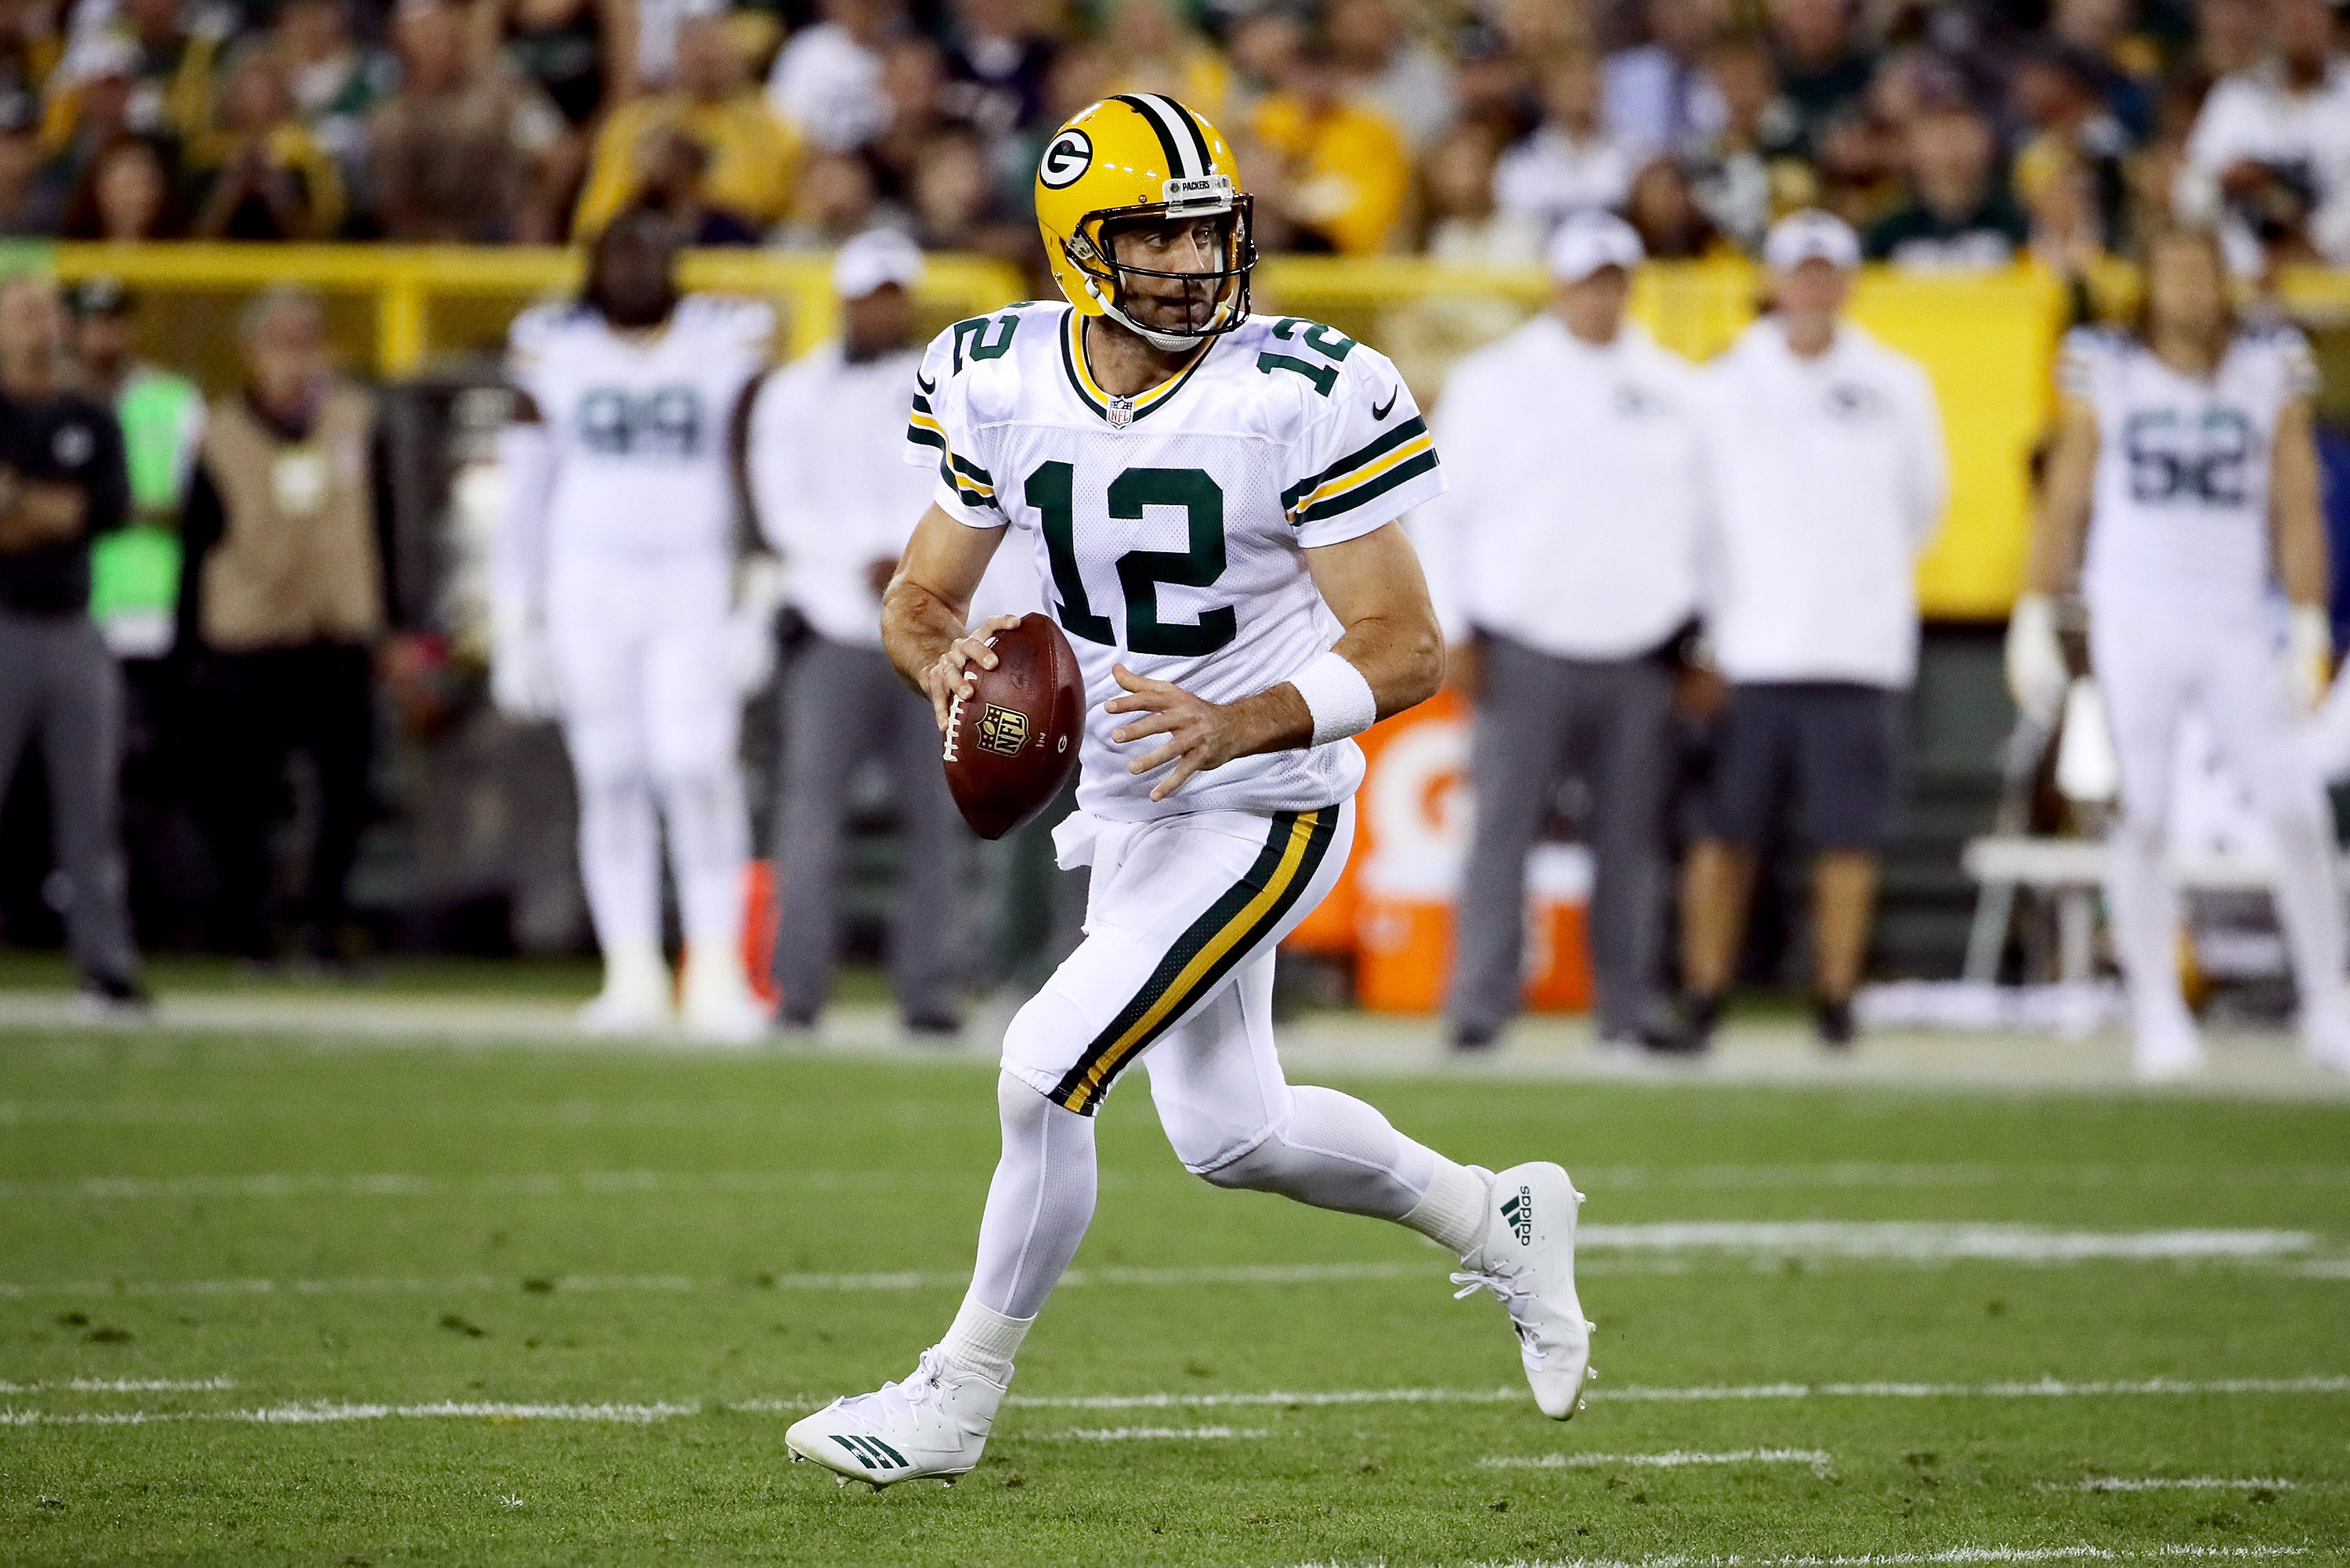 Packers Earn Blowout 35-14 Win over Bears; Aaron Rodgers Throws 4 TDs, News, Scores, Highlights, Stats, and Rumors